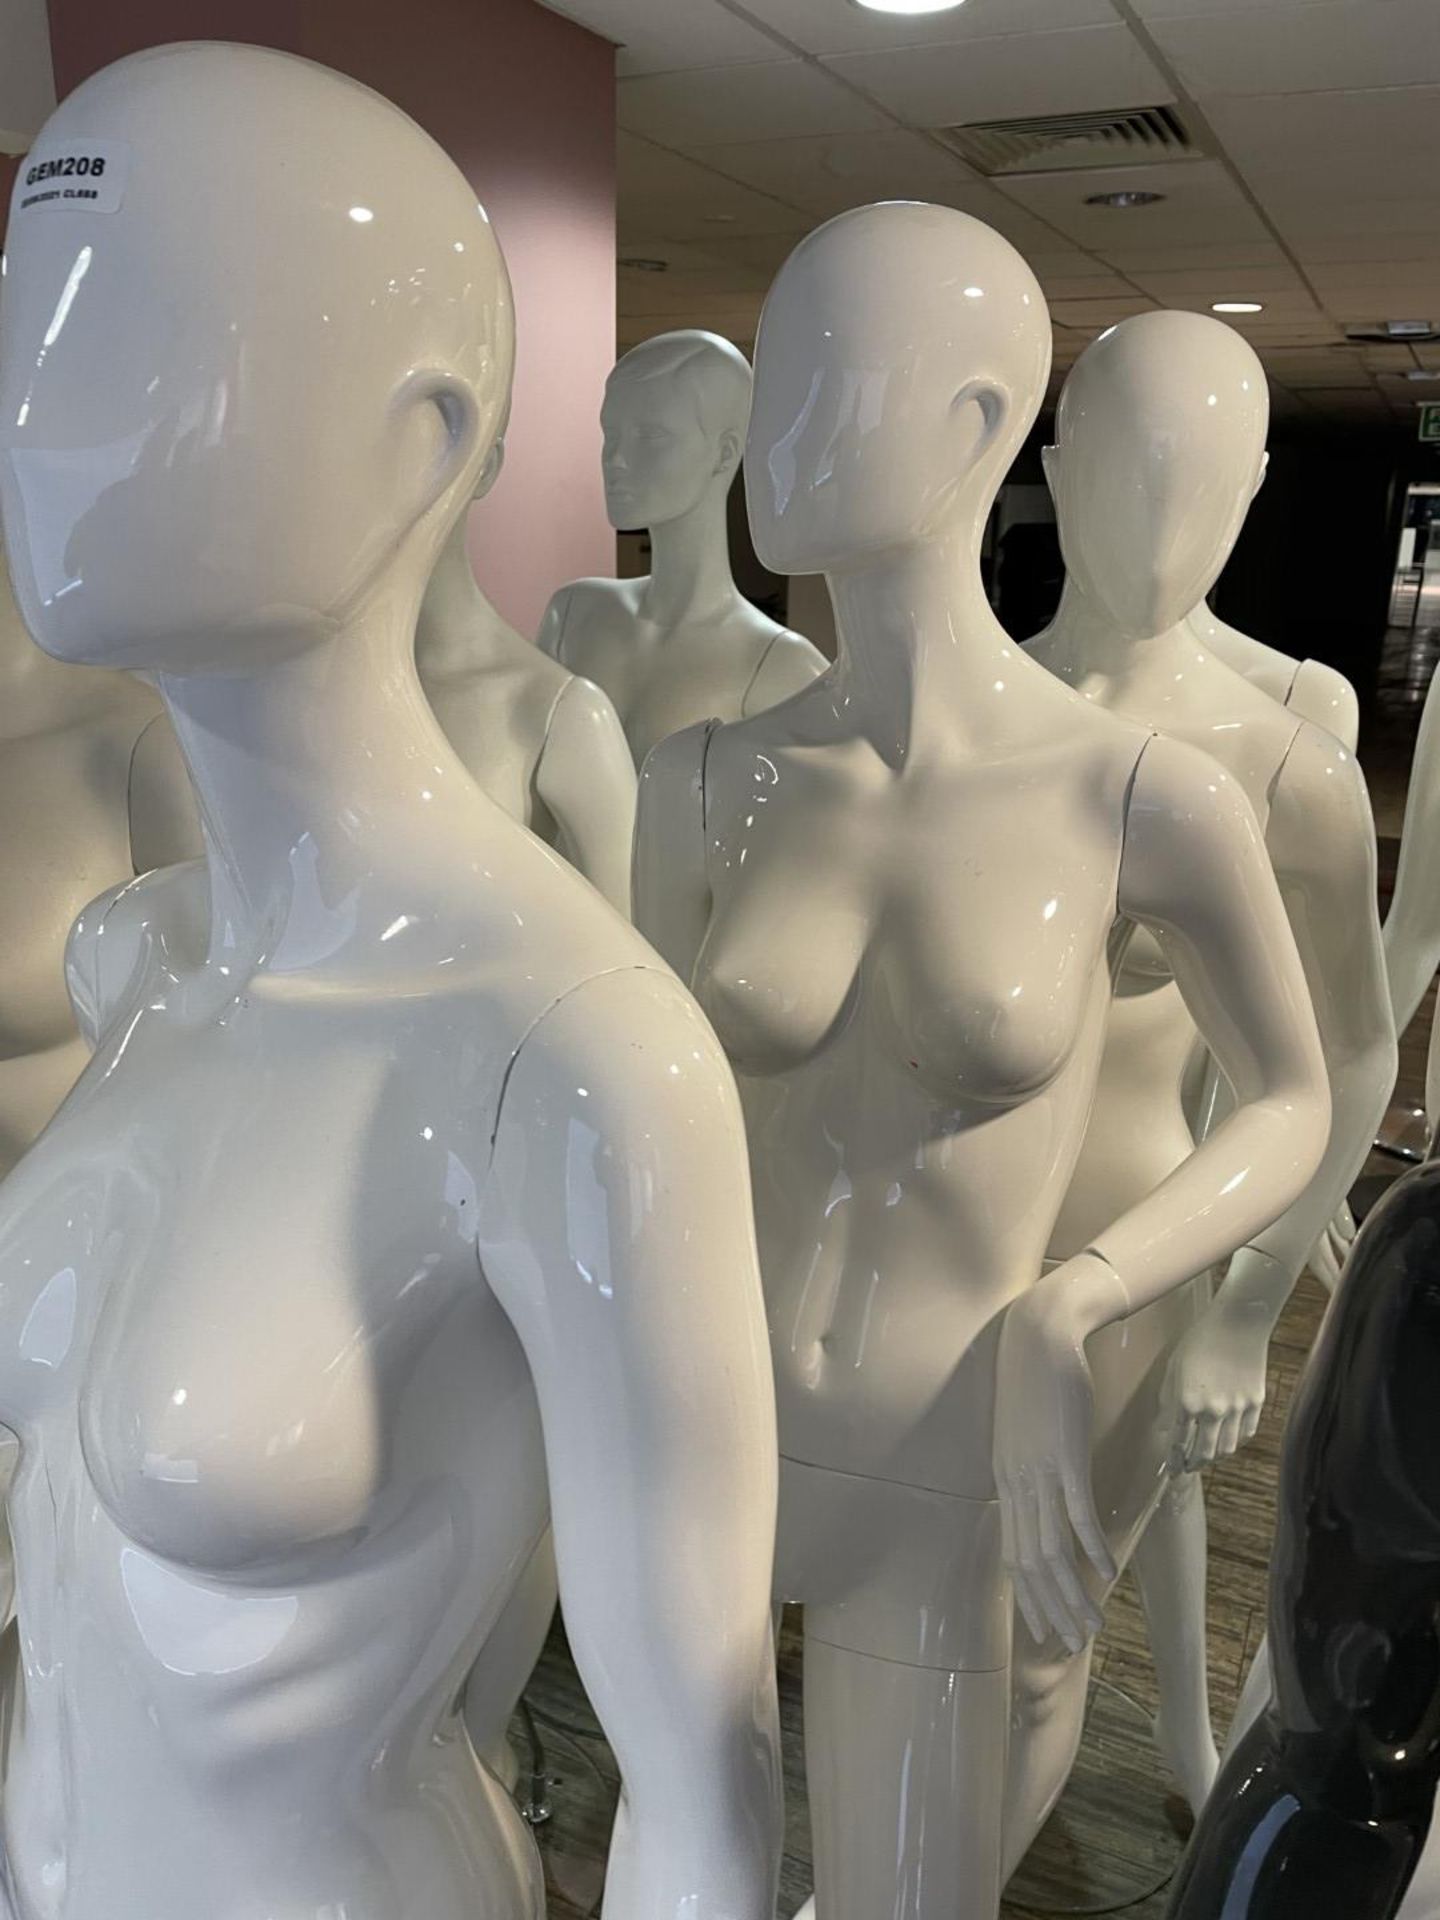 4 x Full Size Female Mannequins on Stands With Gloss Finish - CL670 - Ref: GEM208 - Location: - Image 6 of 9